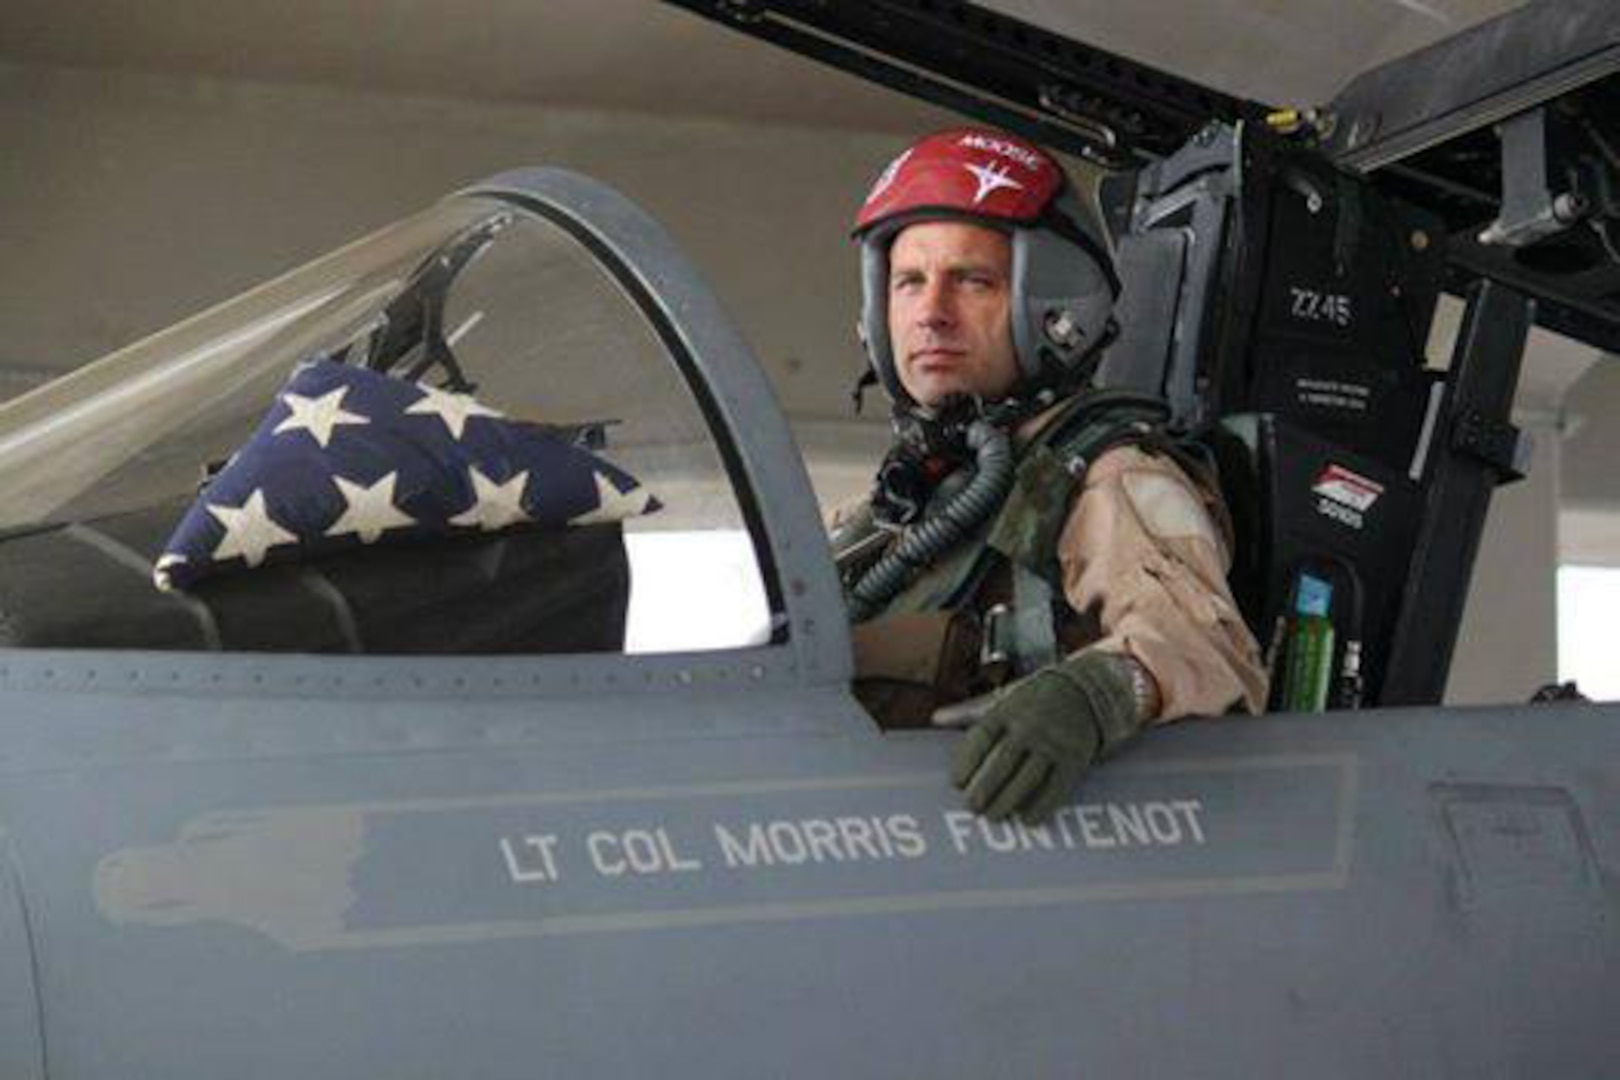 Lt. Col. Morris "Moose" Fontenot Jr. was part of the 104th Fighter Wing based in Westfield, Massachusetts. He was killed Aug. 27, 2014, when his F-15C Eagle crashed in mountainous Virginia terrain. He had been flying  from Massachusetts to New Orleans for a scheduled system upgrade when it went down near Deerfield, Virginia.